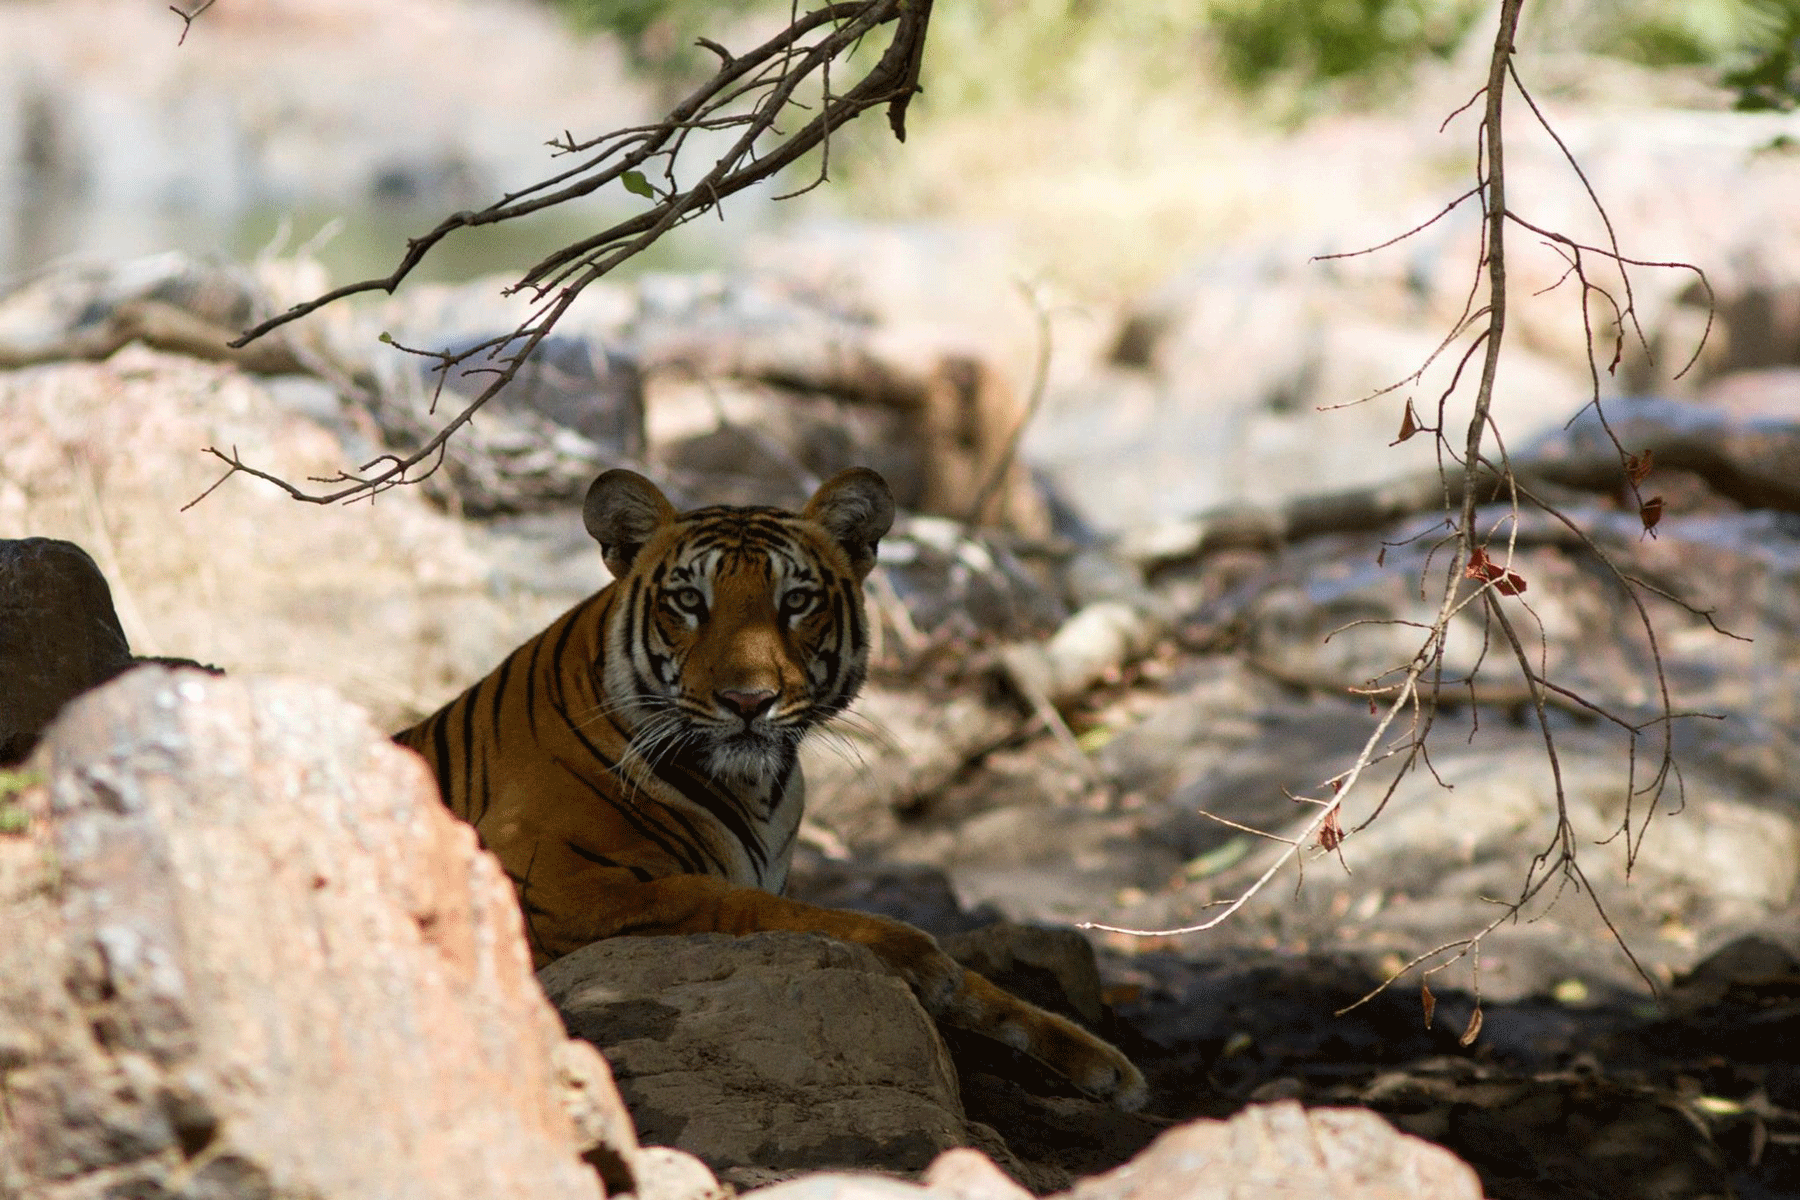 The sleeping tiger woke up and looked surprised (Photo copyright: Ananth Raj)